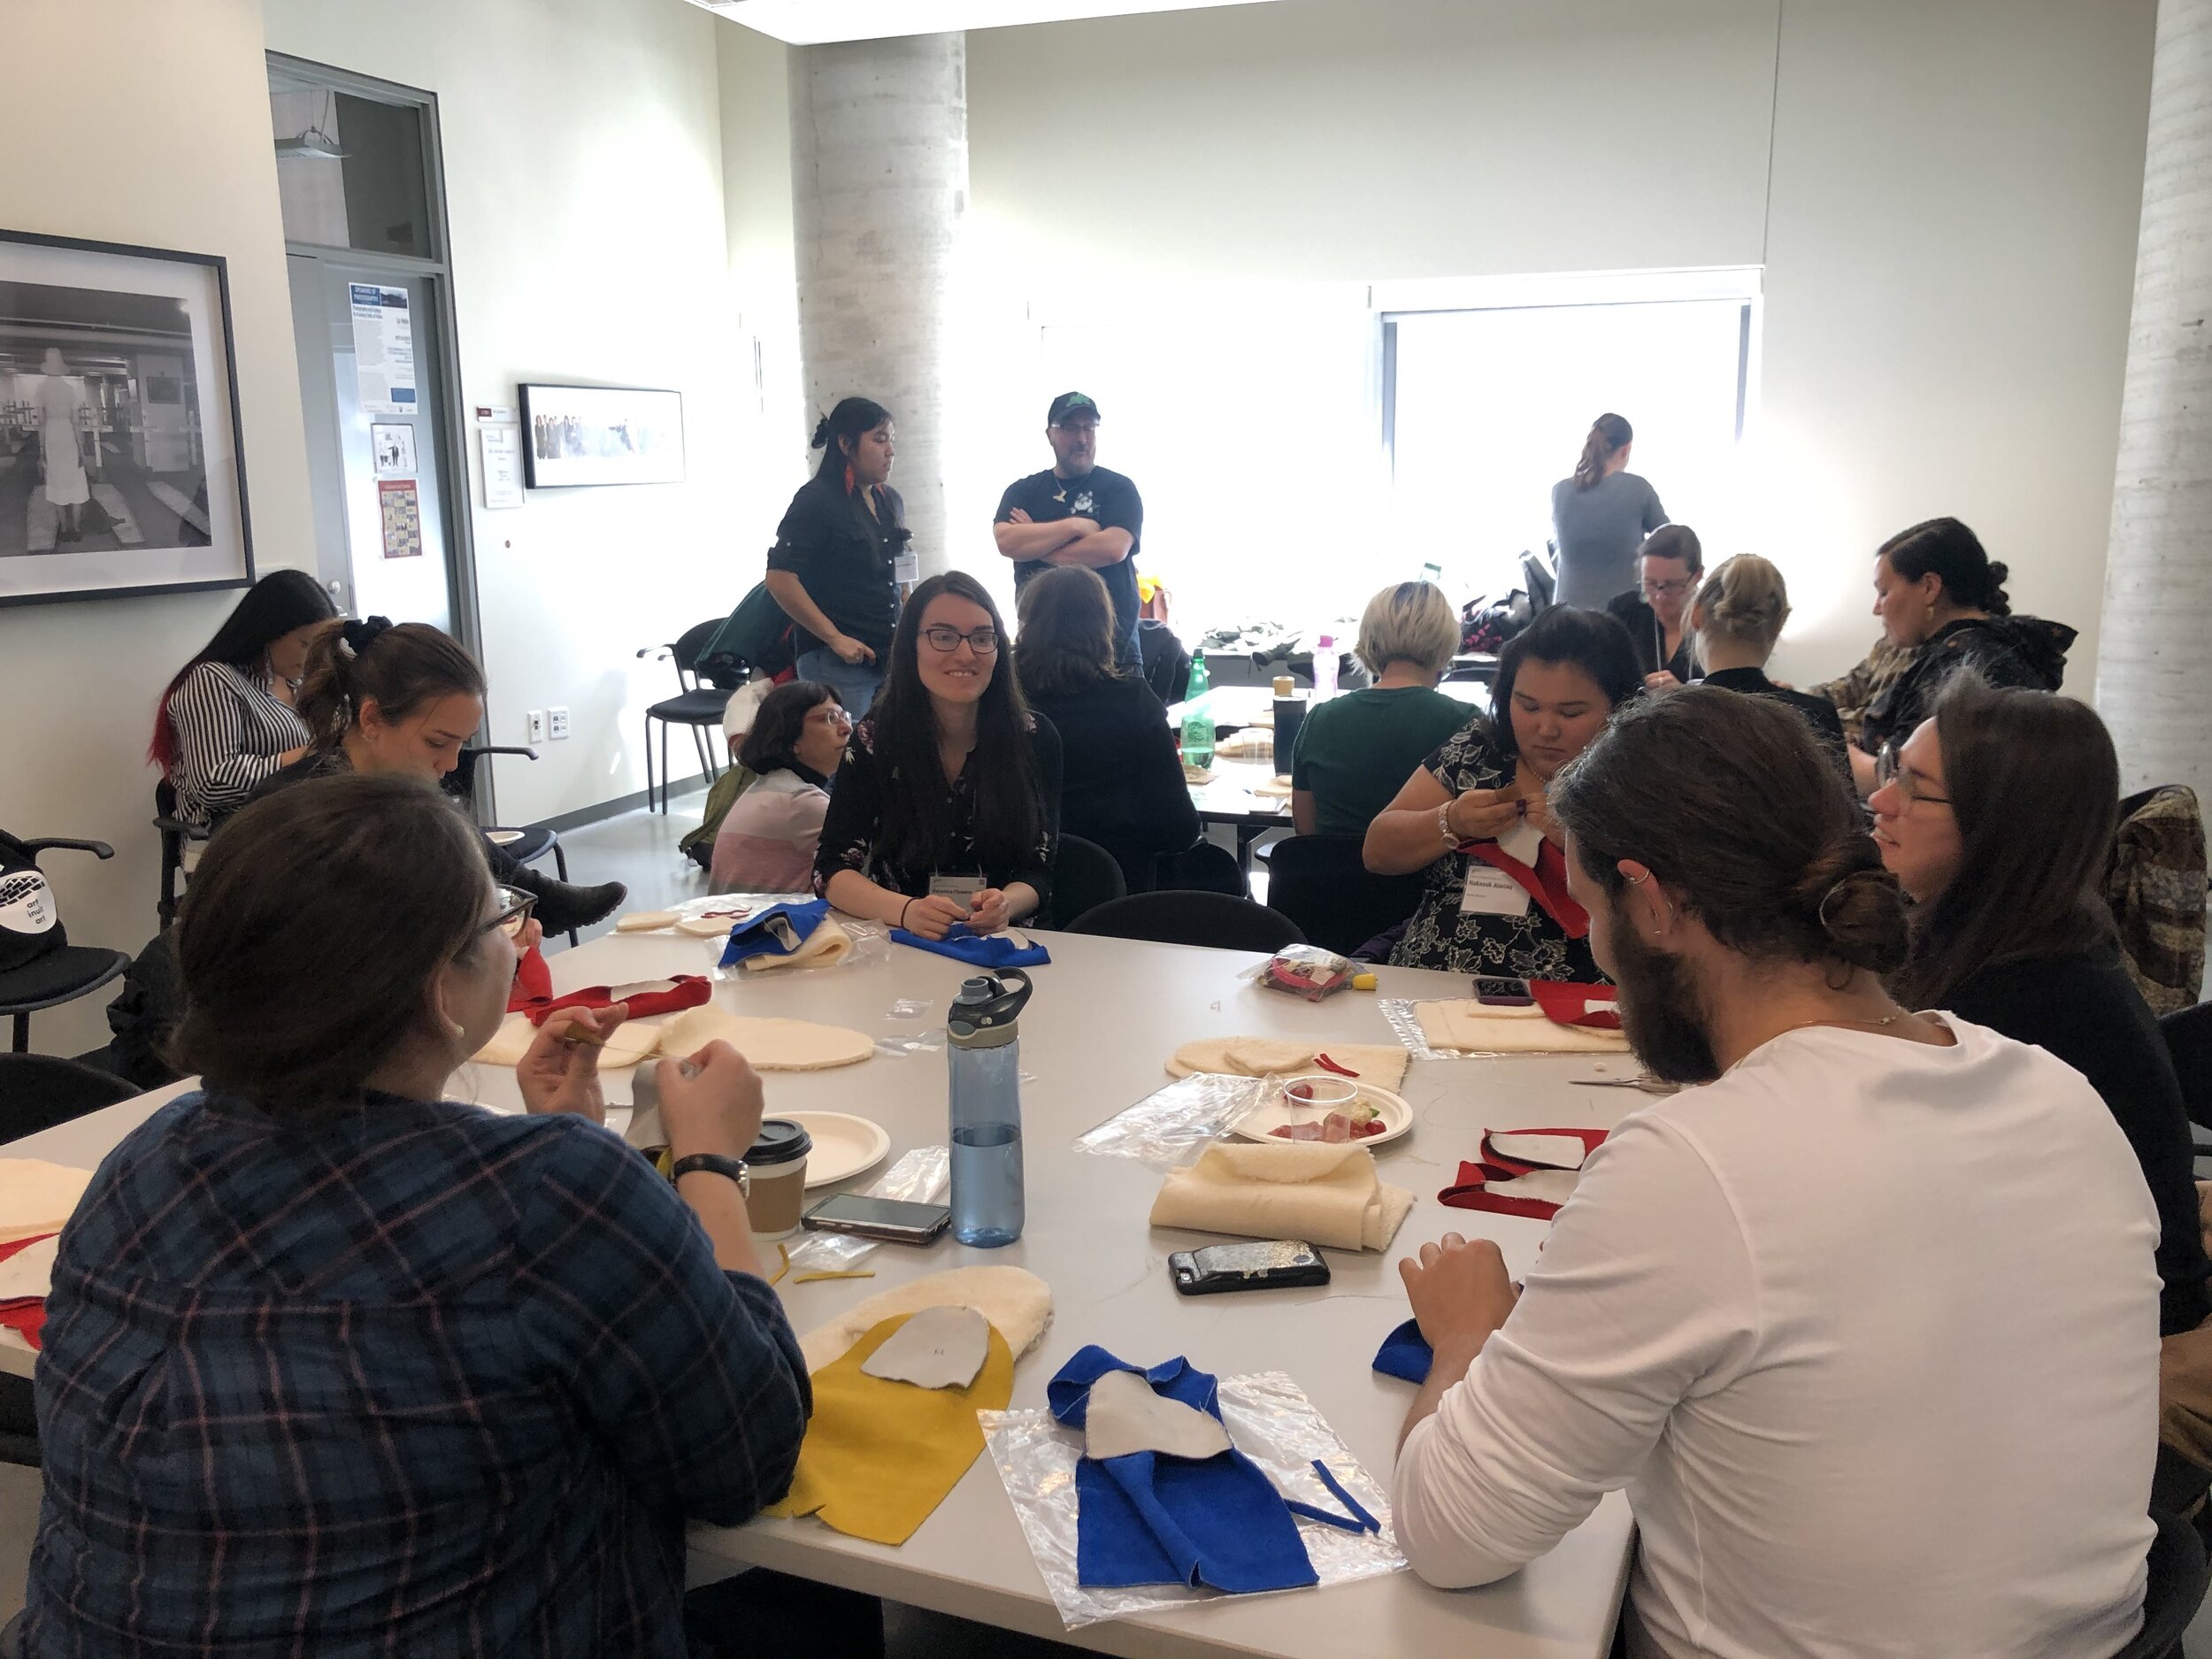  Participants in the Labrador Inuit Slipper Making Workshop, led by Veronica Flowers and Vanessa Flowers. This session was held at Concordia University, Montreal QC, October 2019. Photo by Heather Igloliorte. 